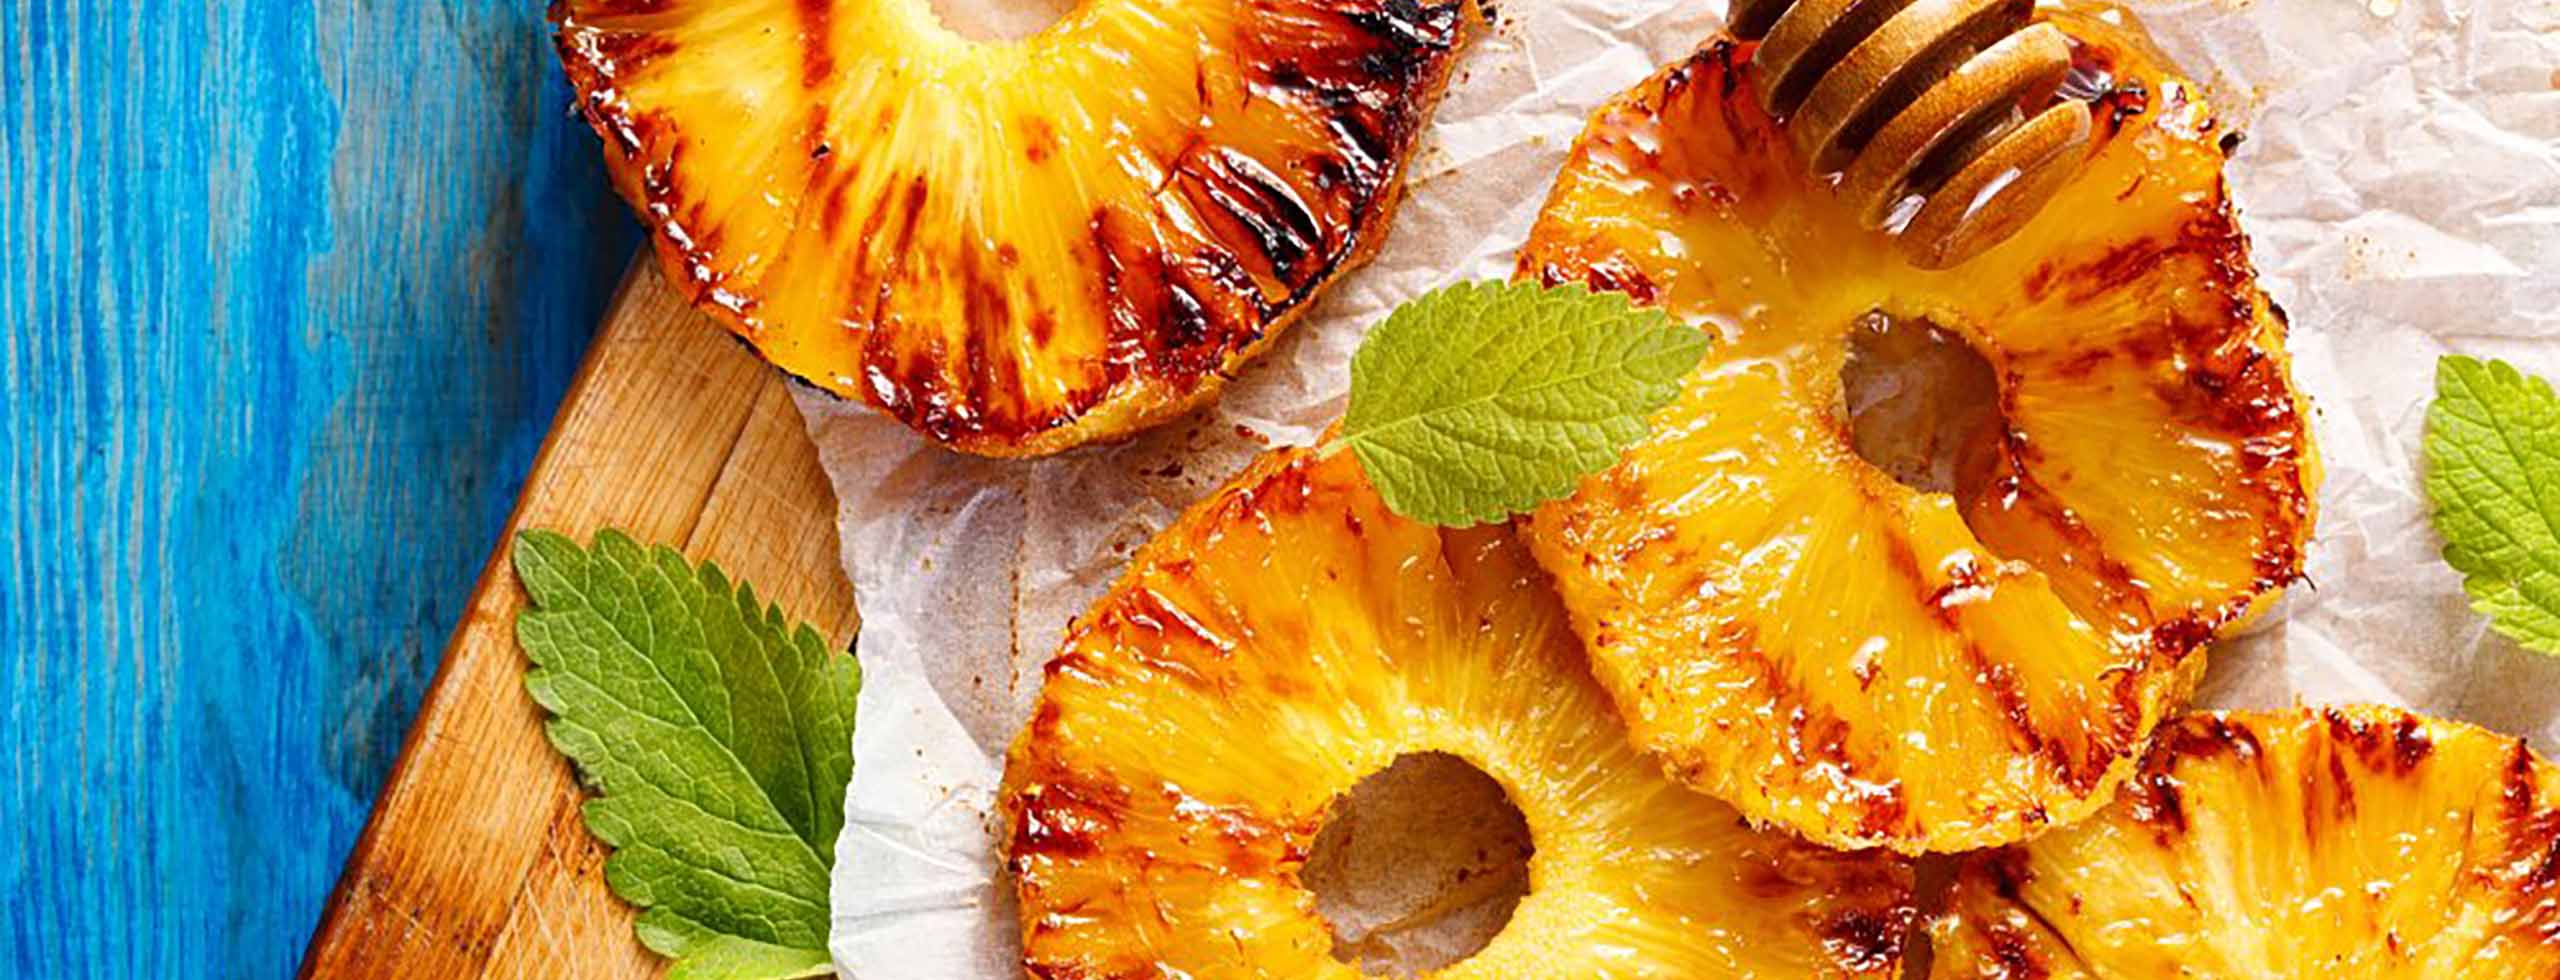 How To Grill Fruit on the BBQ